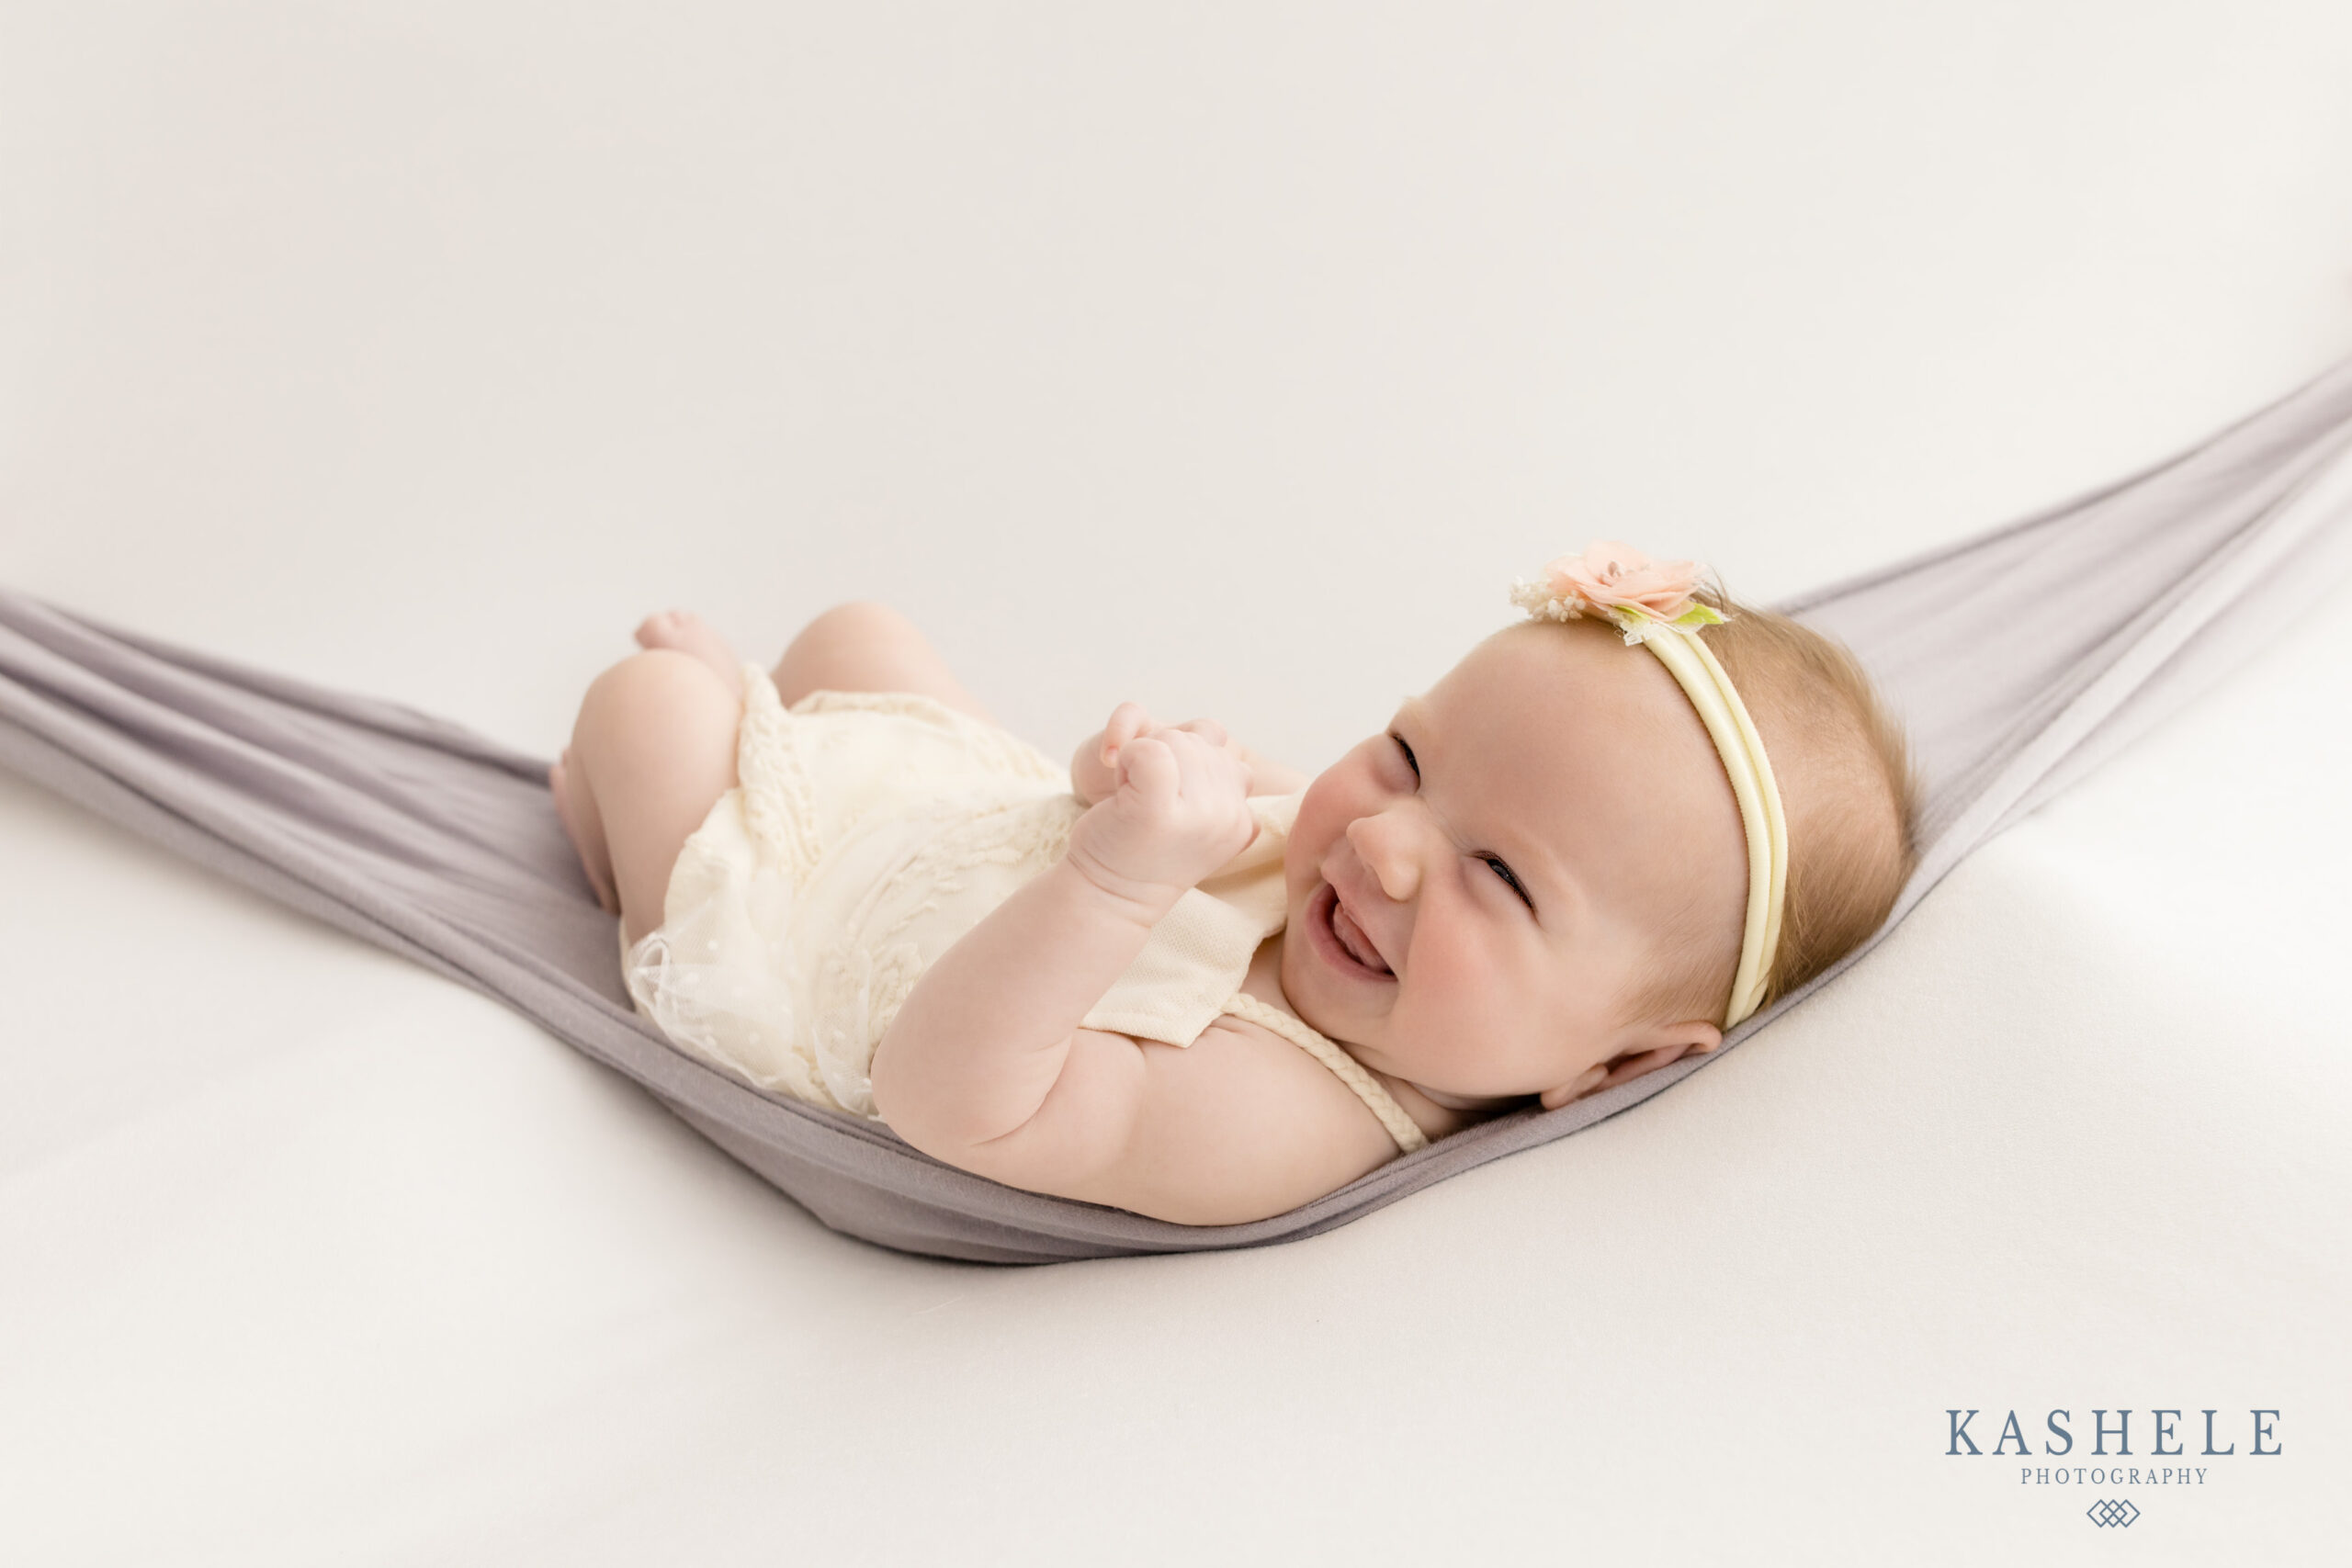 14 newborn baby photo ideas and how to take them - Picsart Blog